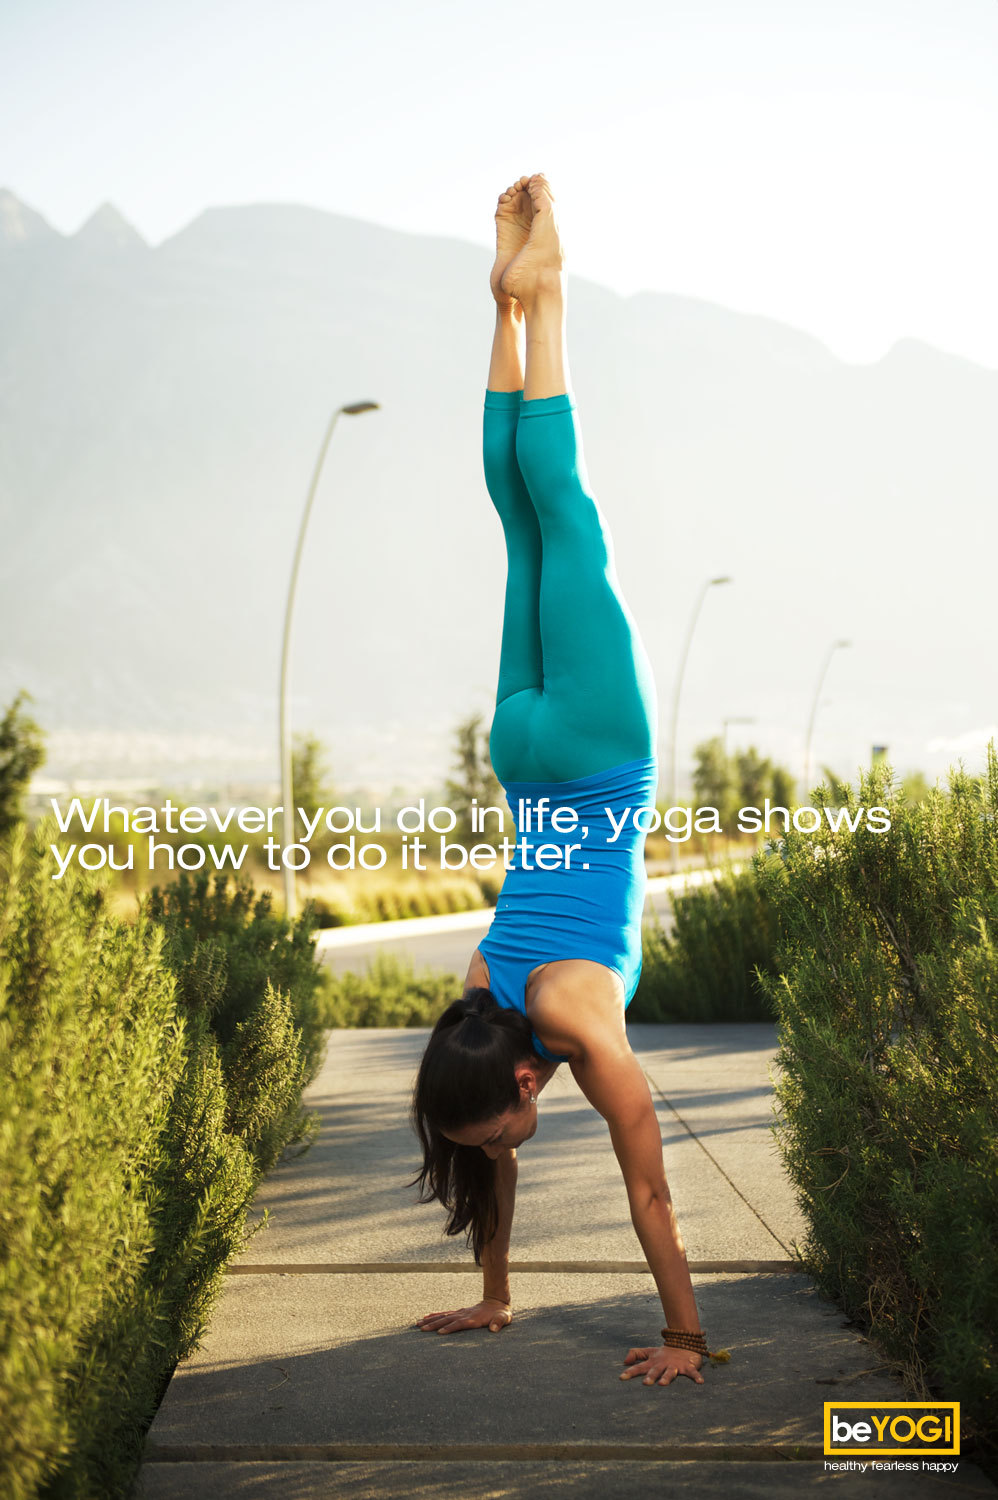 brendayoga:

Whatever you do in life, yoga shows you how to do it better.